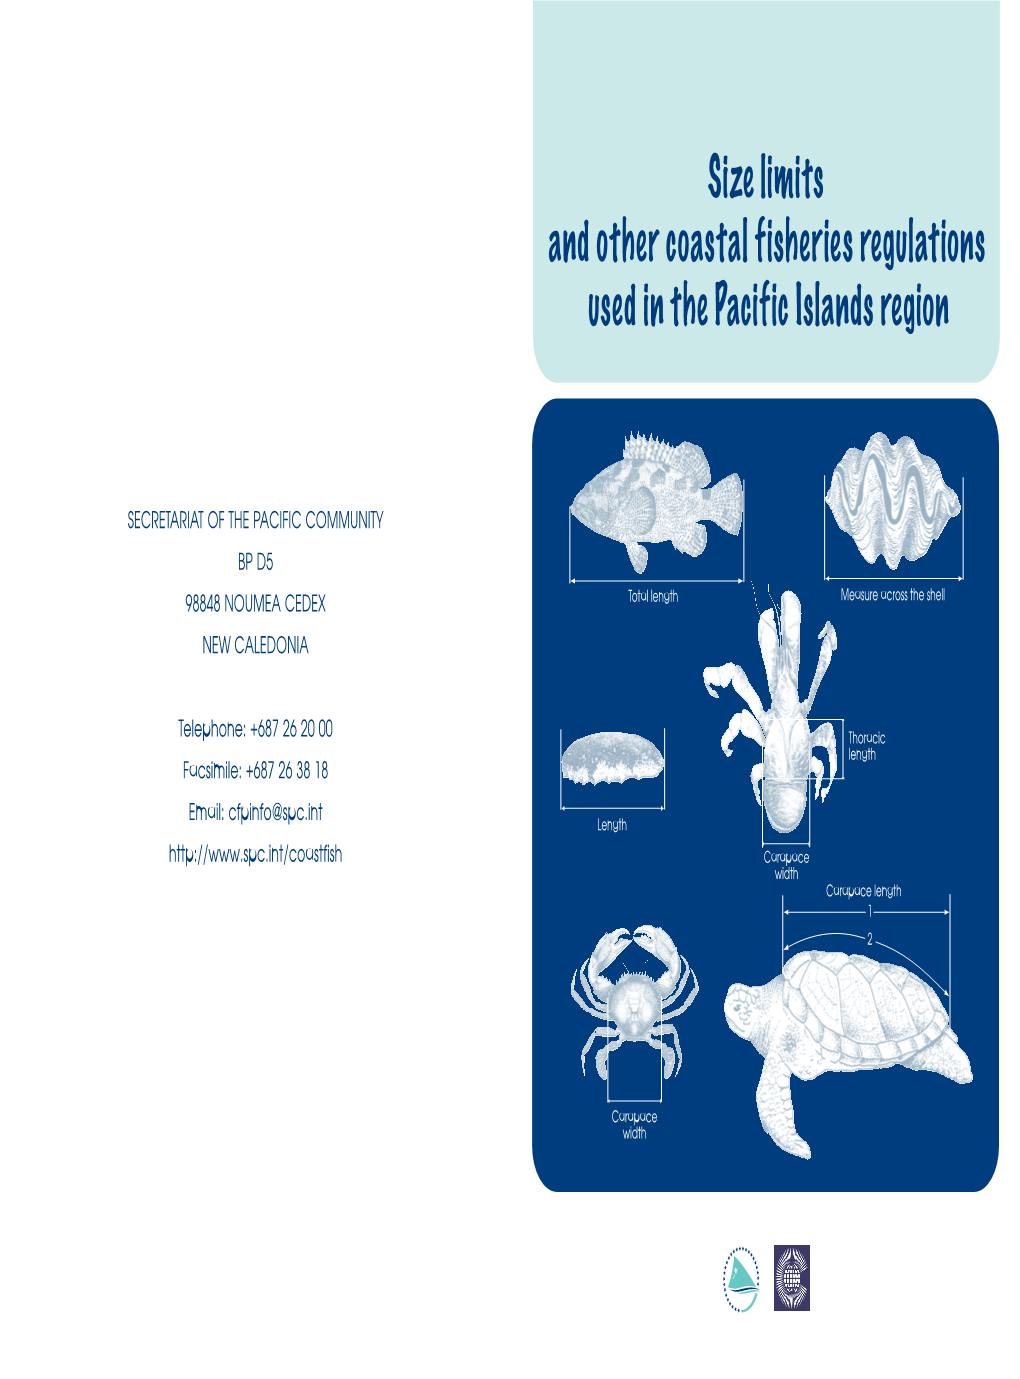 Size Limits and Other Coastal Fisheries Regulations Used in the Pacific Islands Region